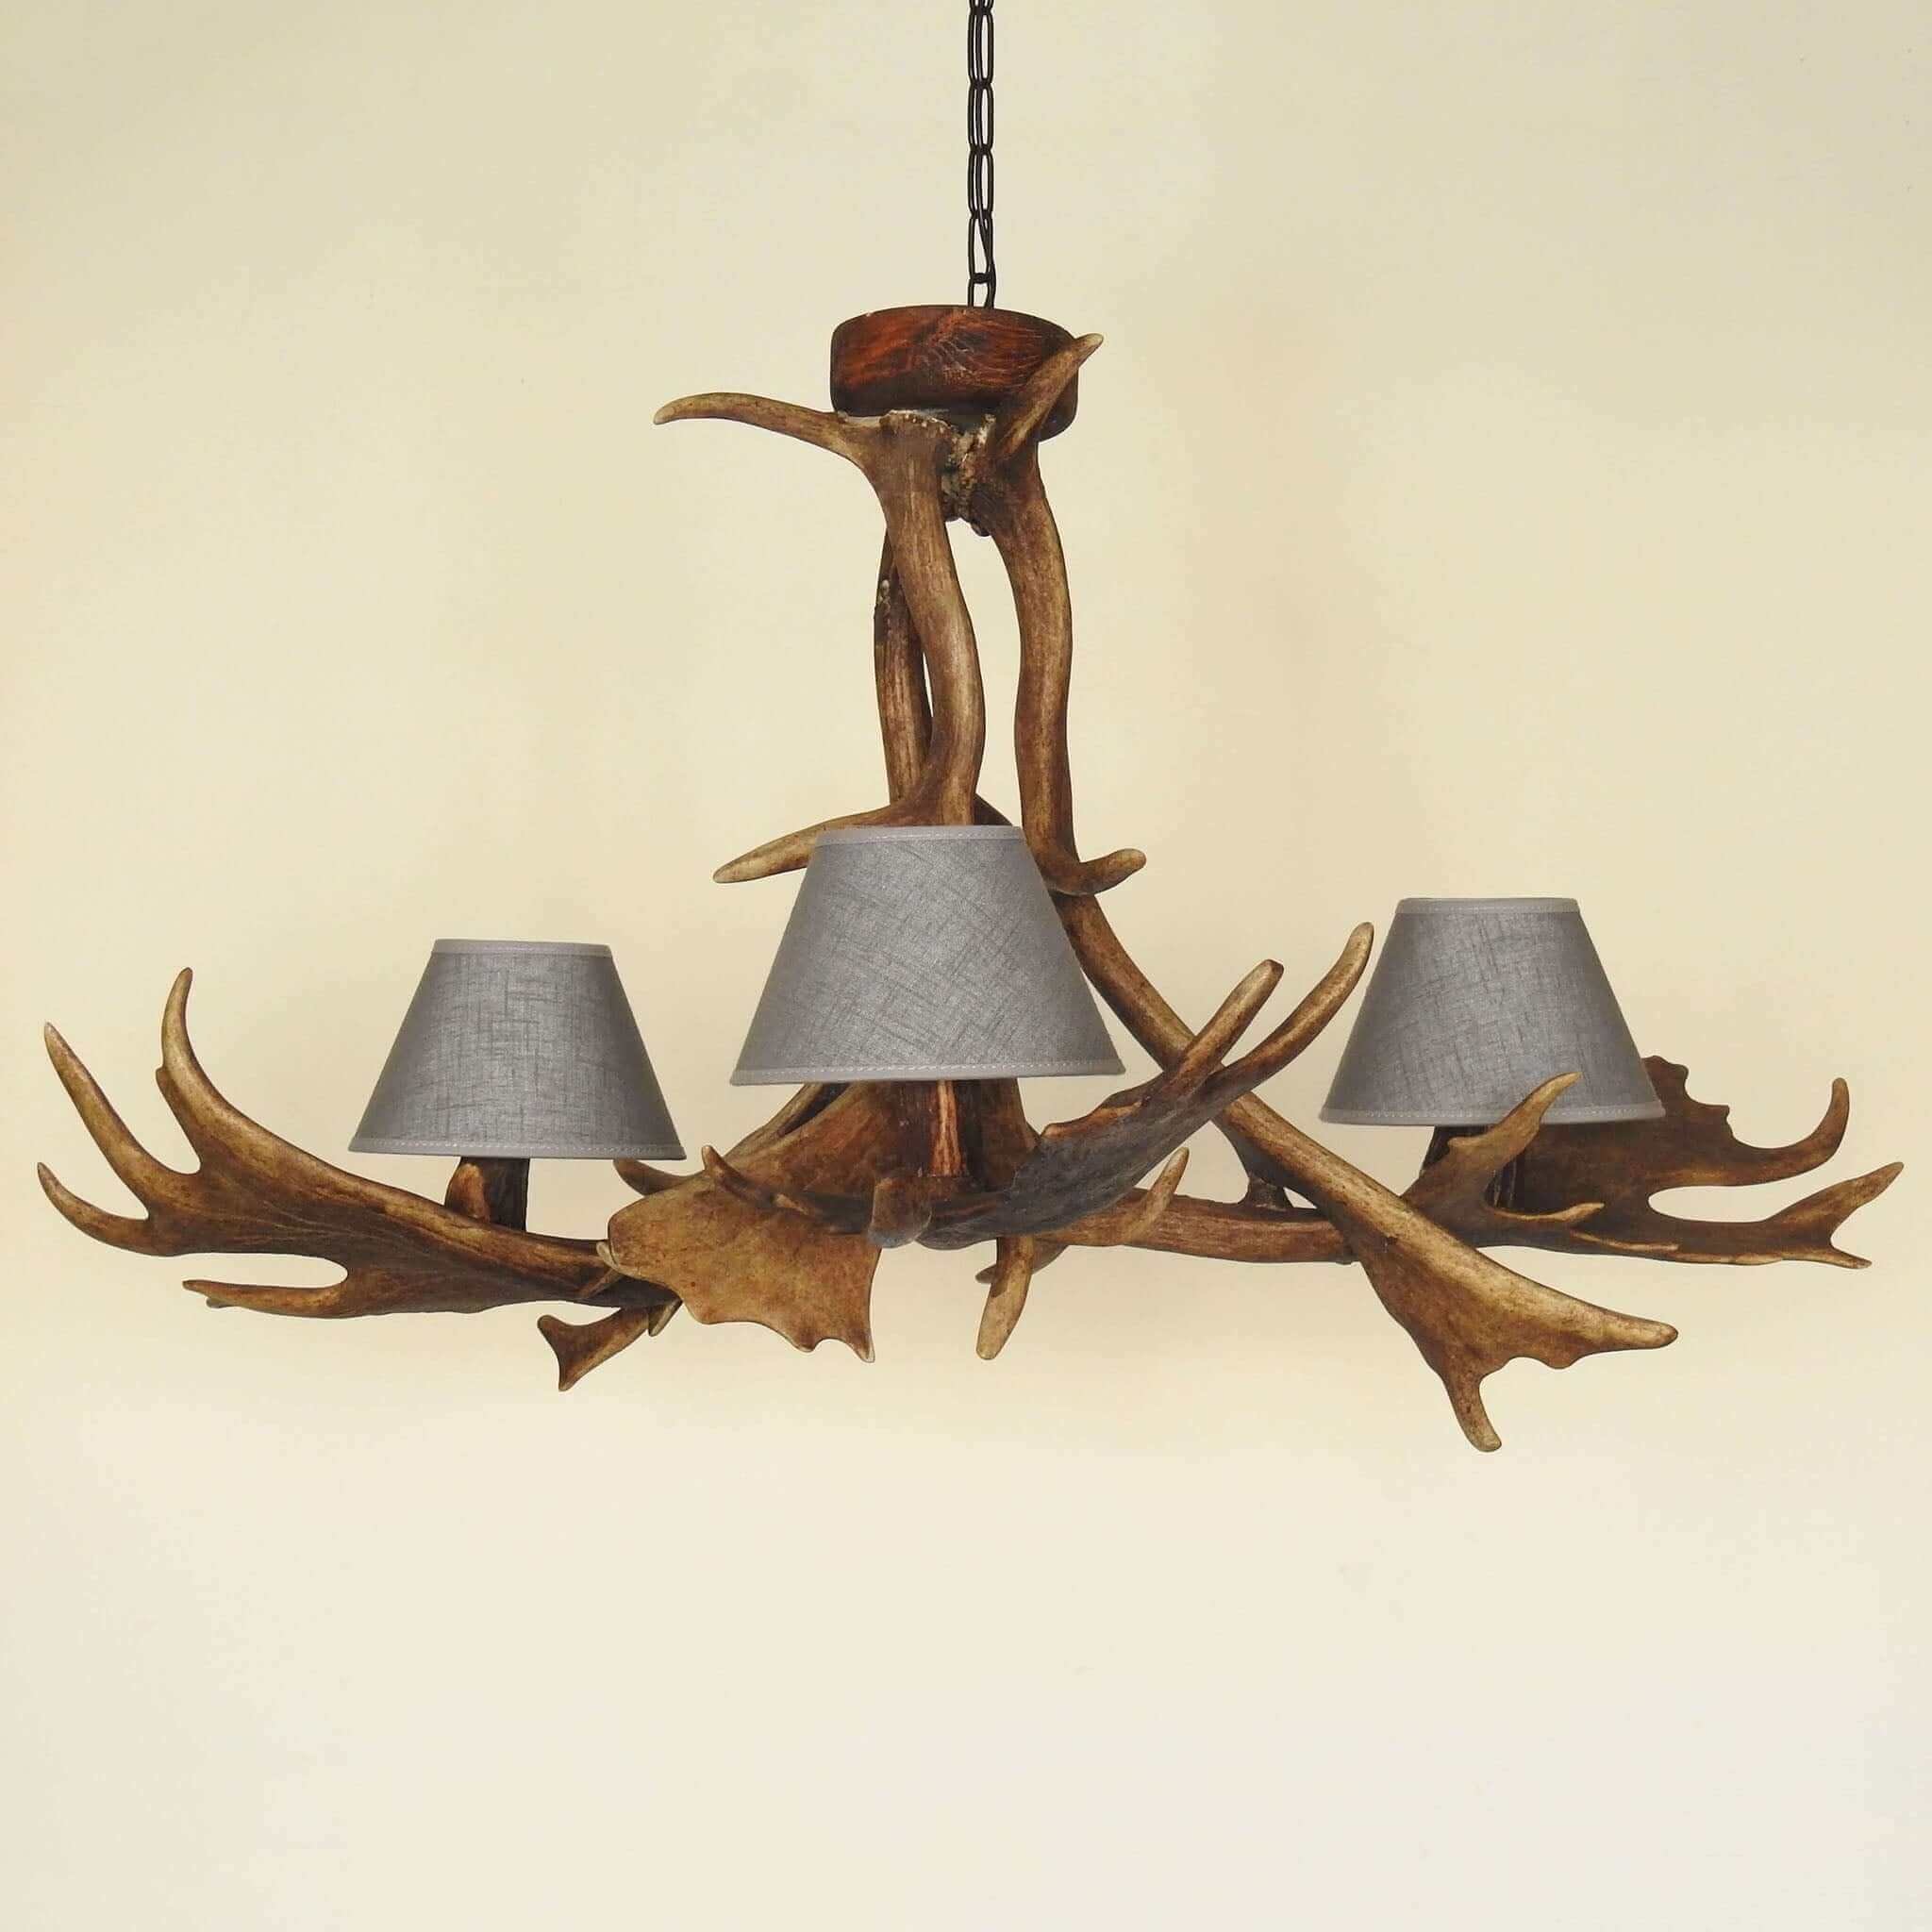 Rustic style antler chandelier with shades.